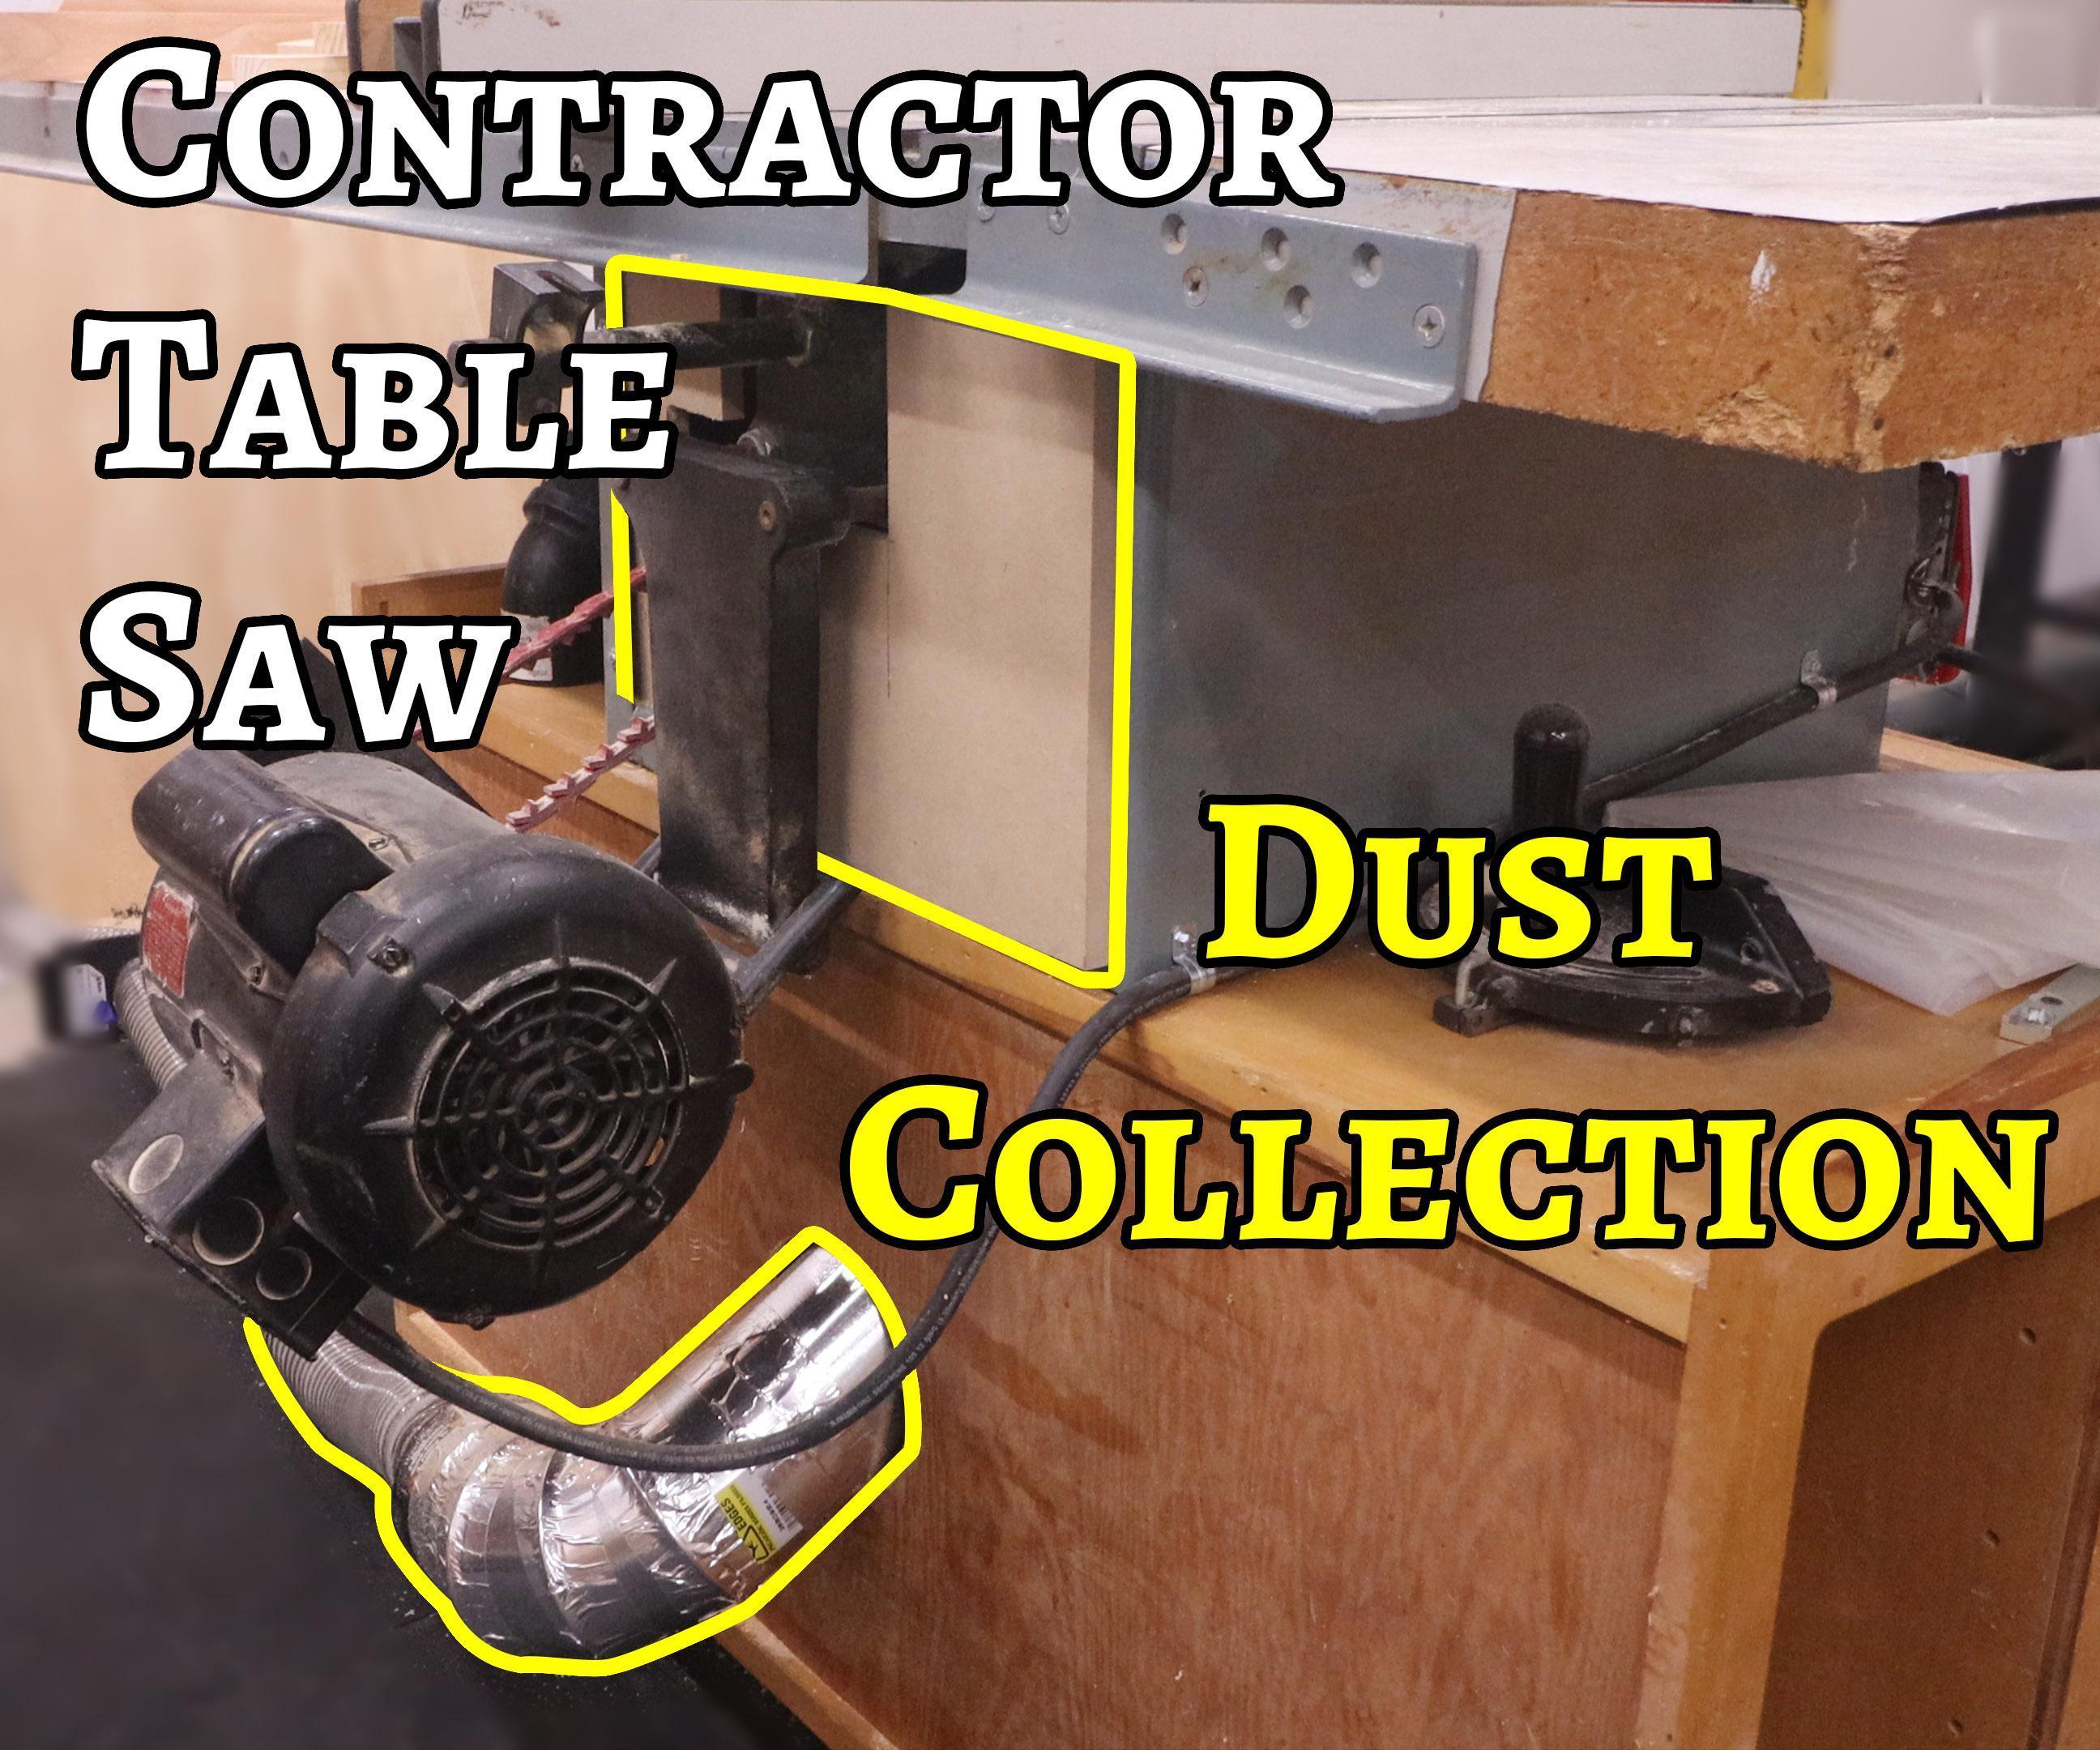 Adding Dust Collection to a Contractor's Table Saw